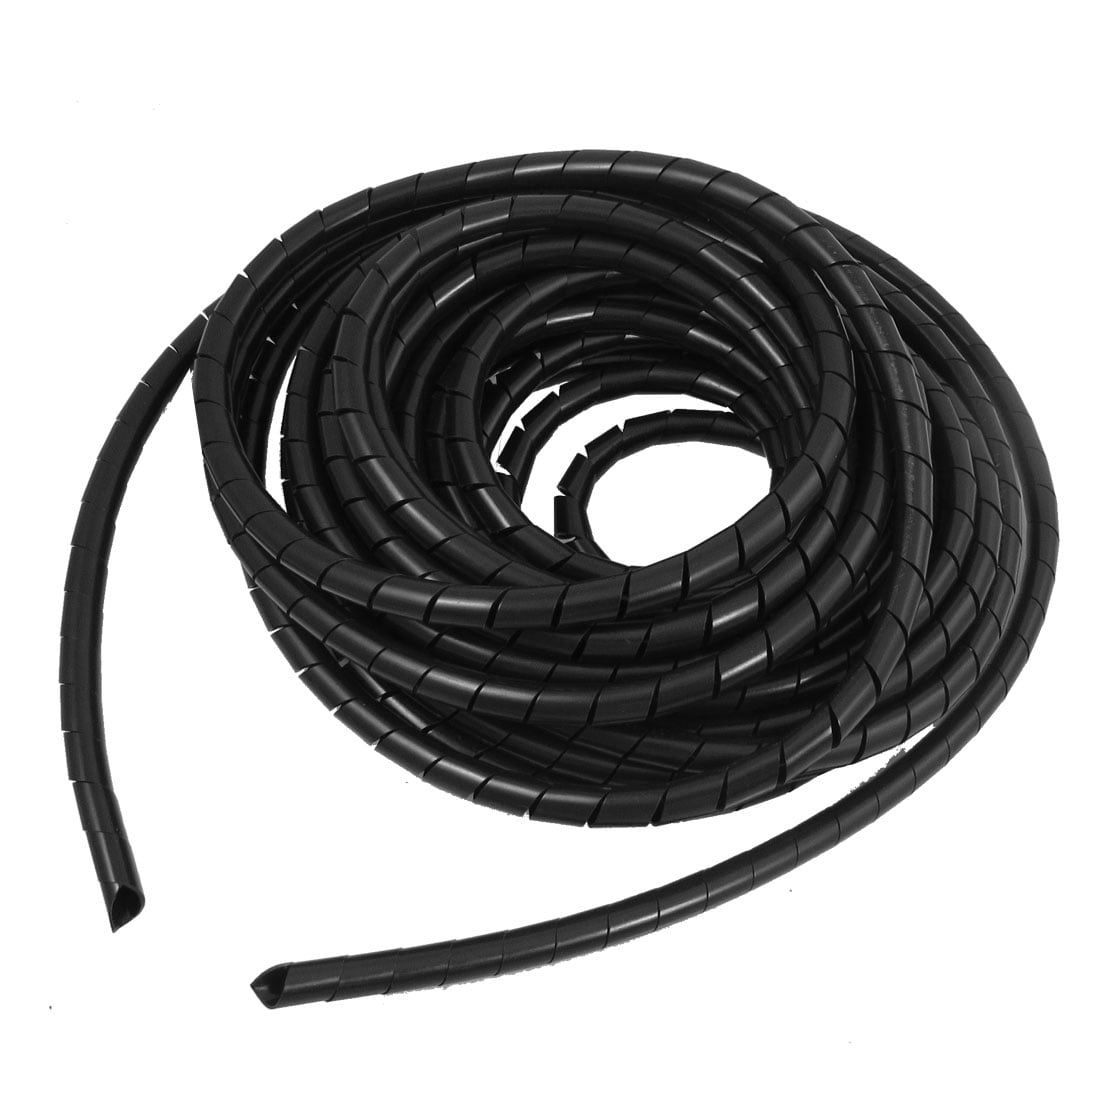 Spiral Cable Wire Wrap Tube Computer Manage Cord clear 6mm 52.5FT 16M 